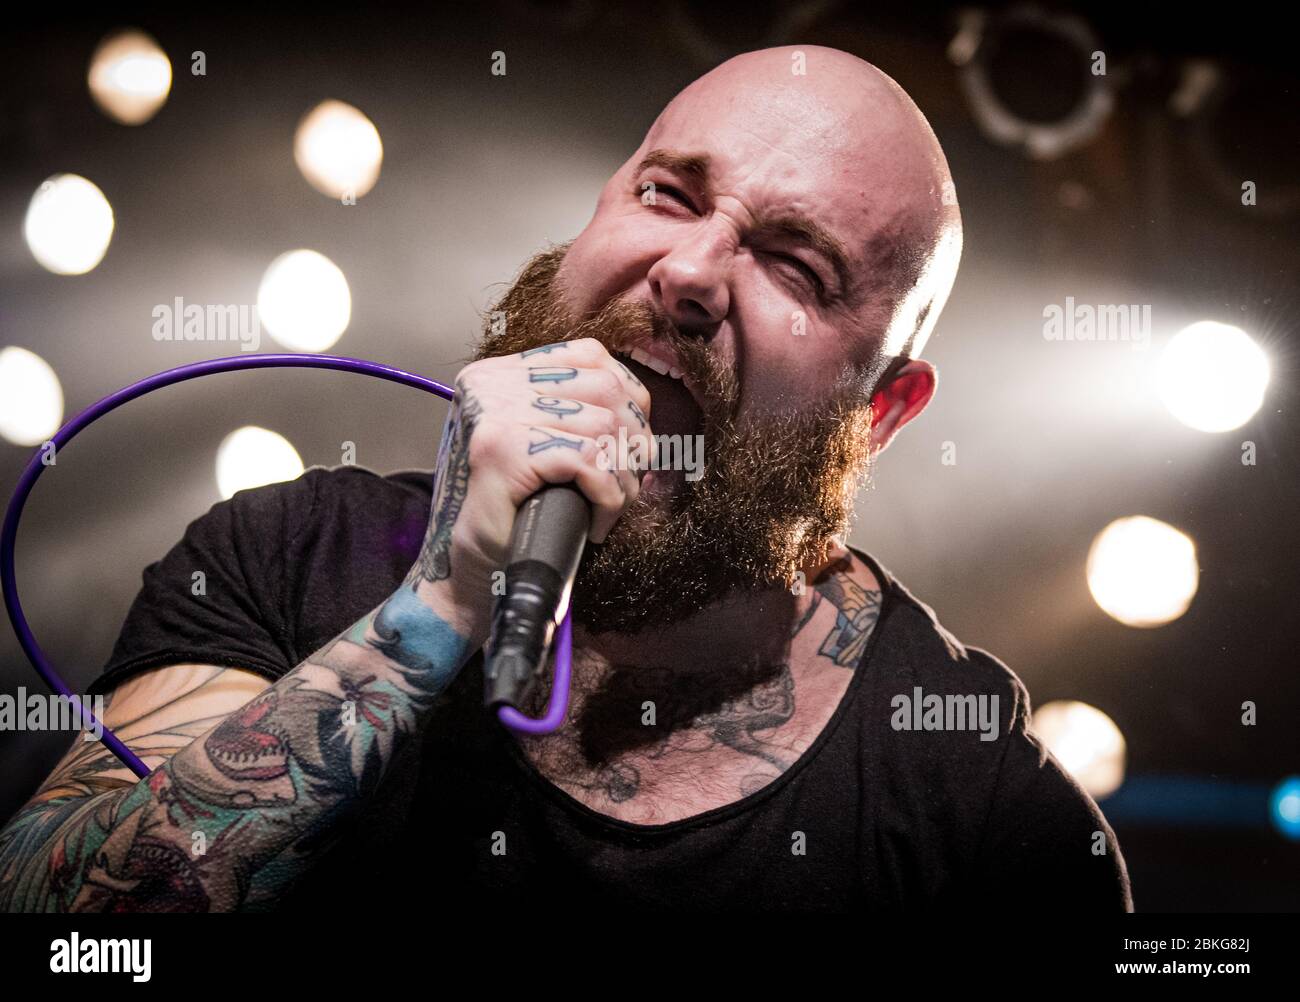 Copenhagen, March 2018. The American metalcore band August Burns Red performs a live concert at Pumpehuset in Copenhagen. Here vocalist Jake is seen live on stage. (Photo credit: Gonzales